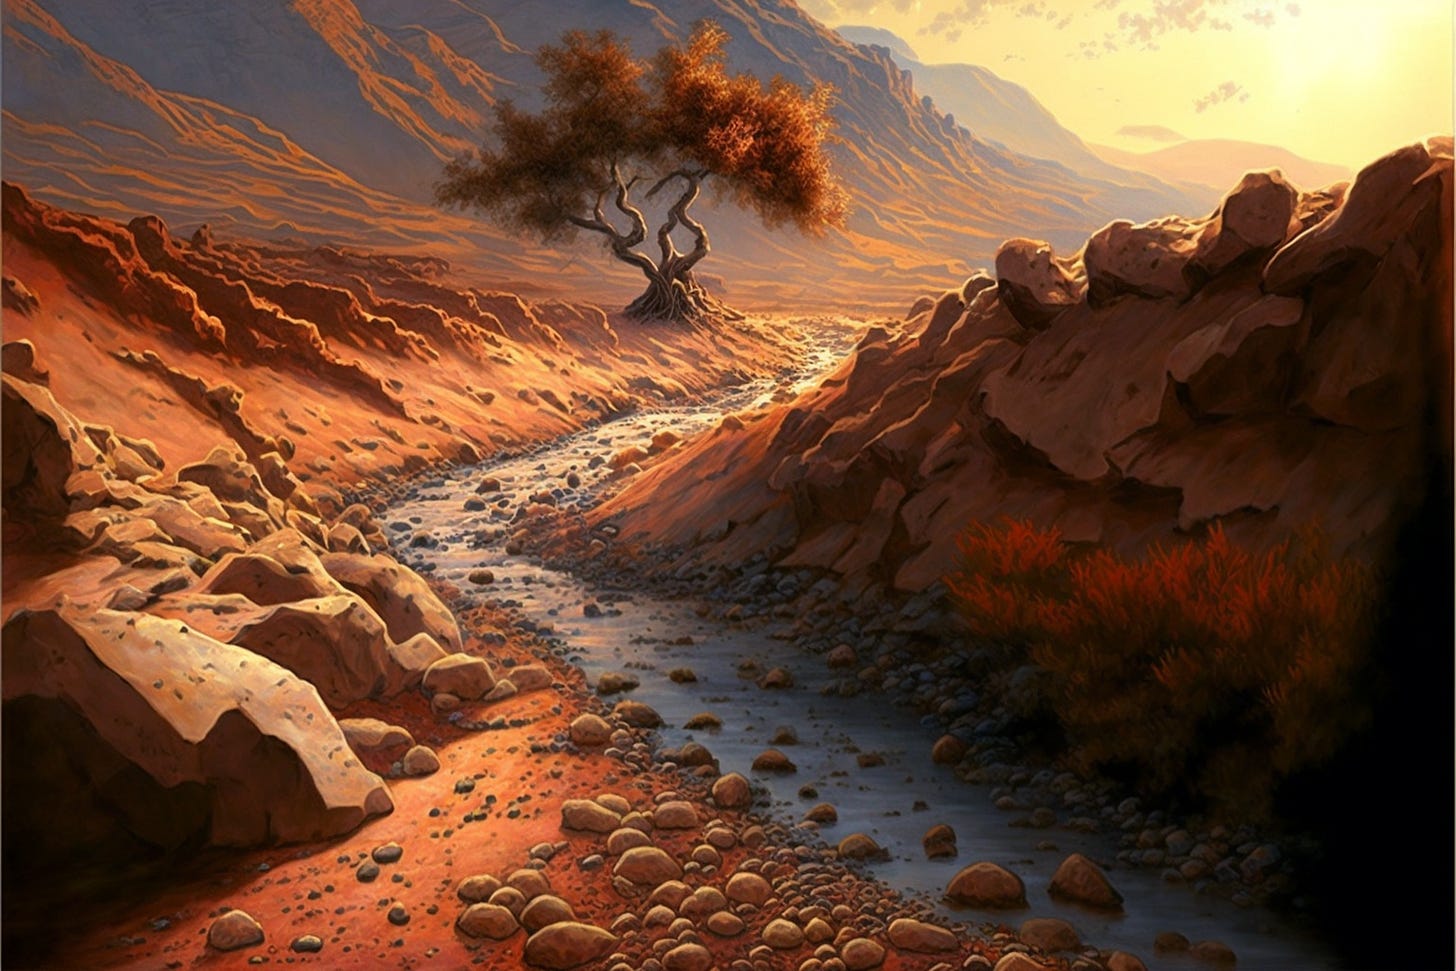 An arid, rocky, mountainous landscape featuring a dried up riverbed